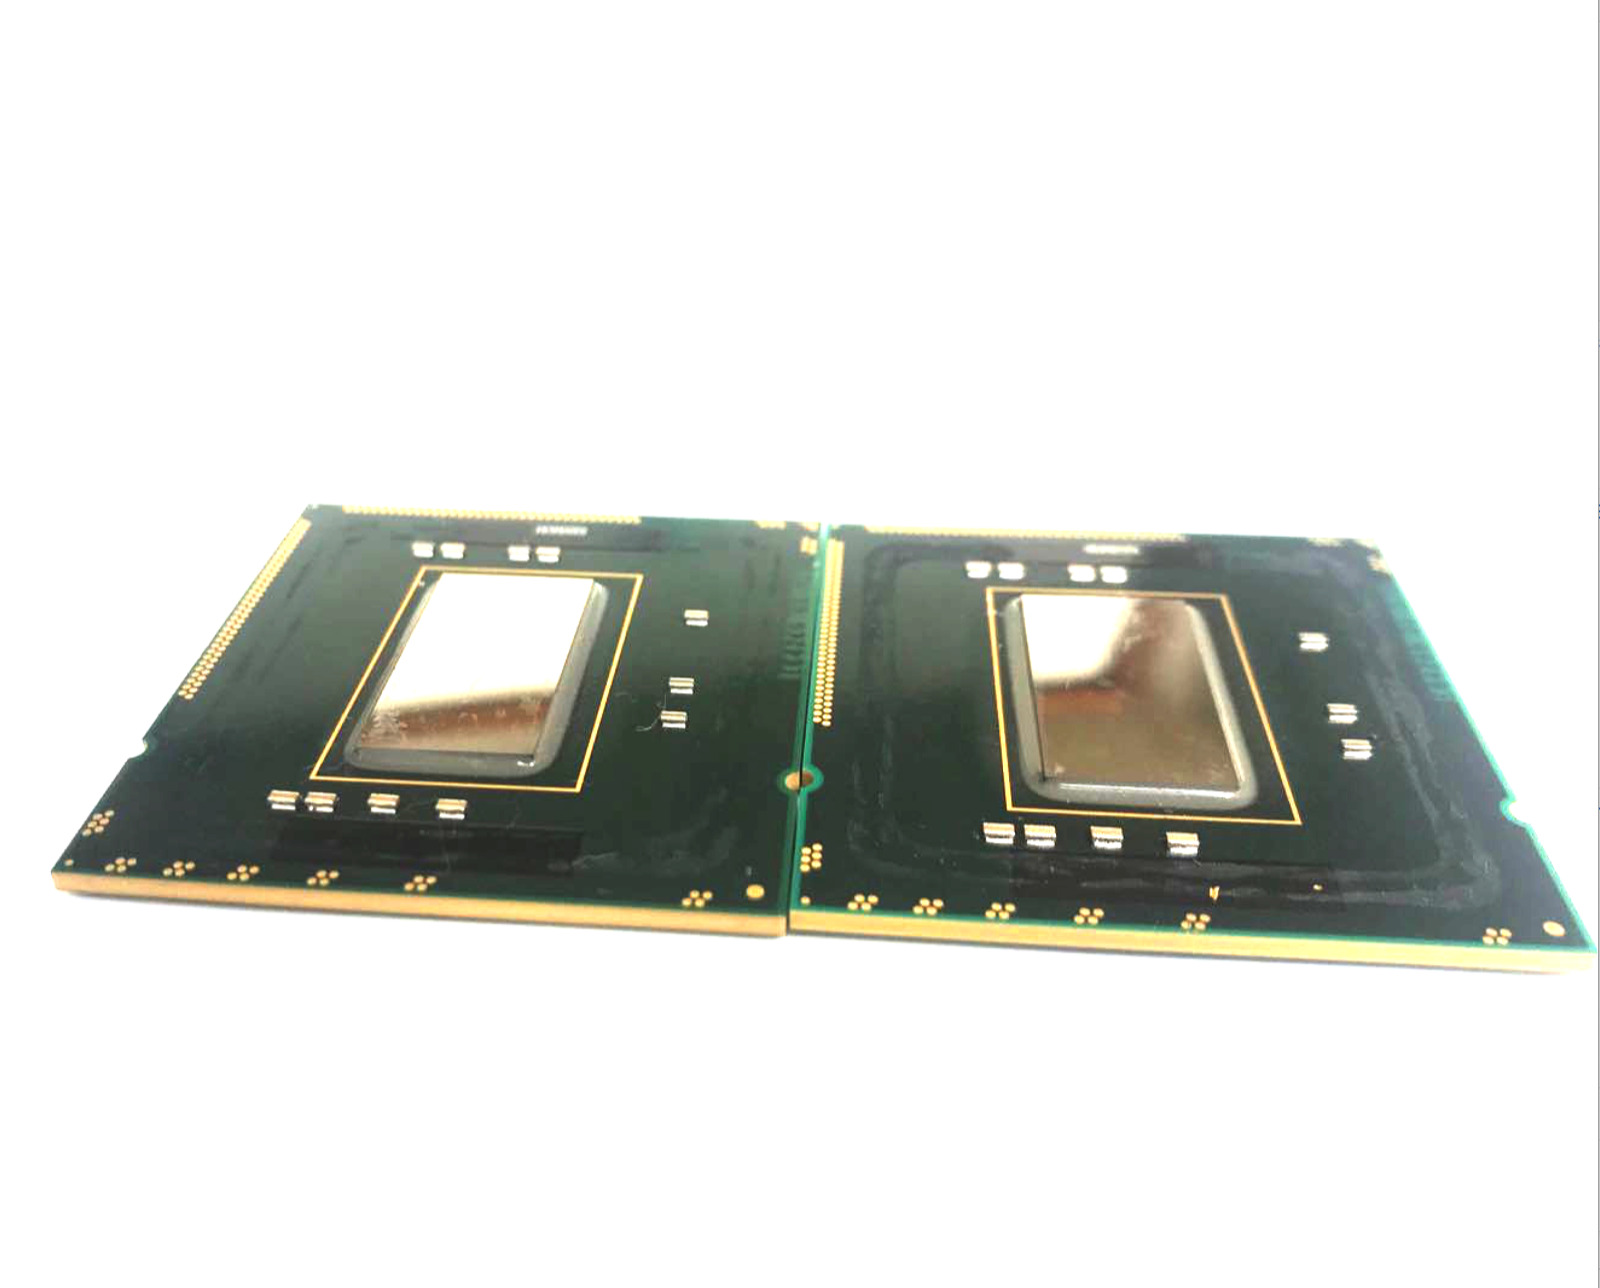 Matched Pair (2) Delidded Intel XEON X5680 3.33GHz 6 Core Processor Mac Pro USA